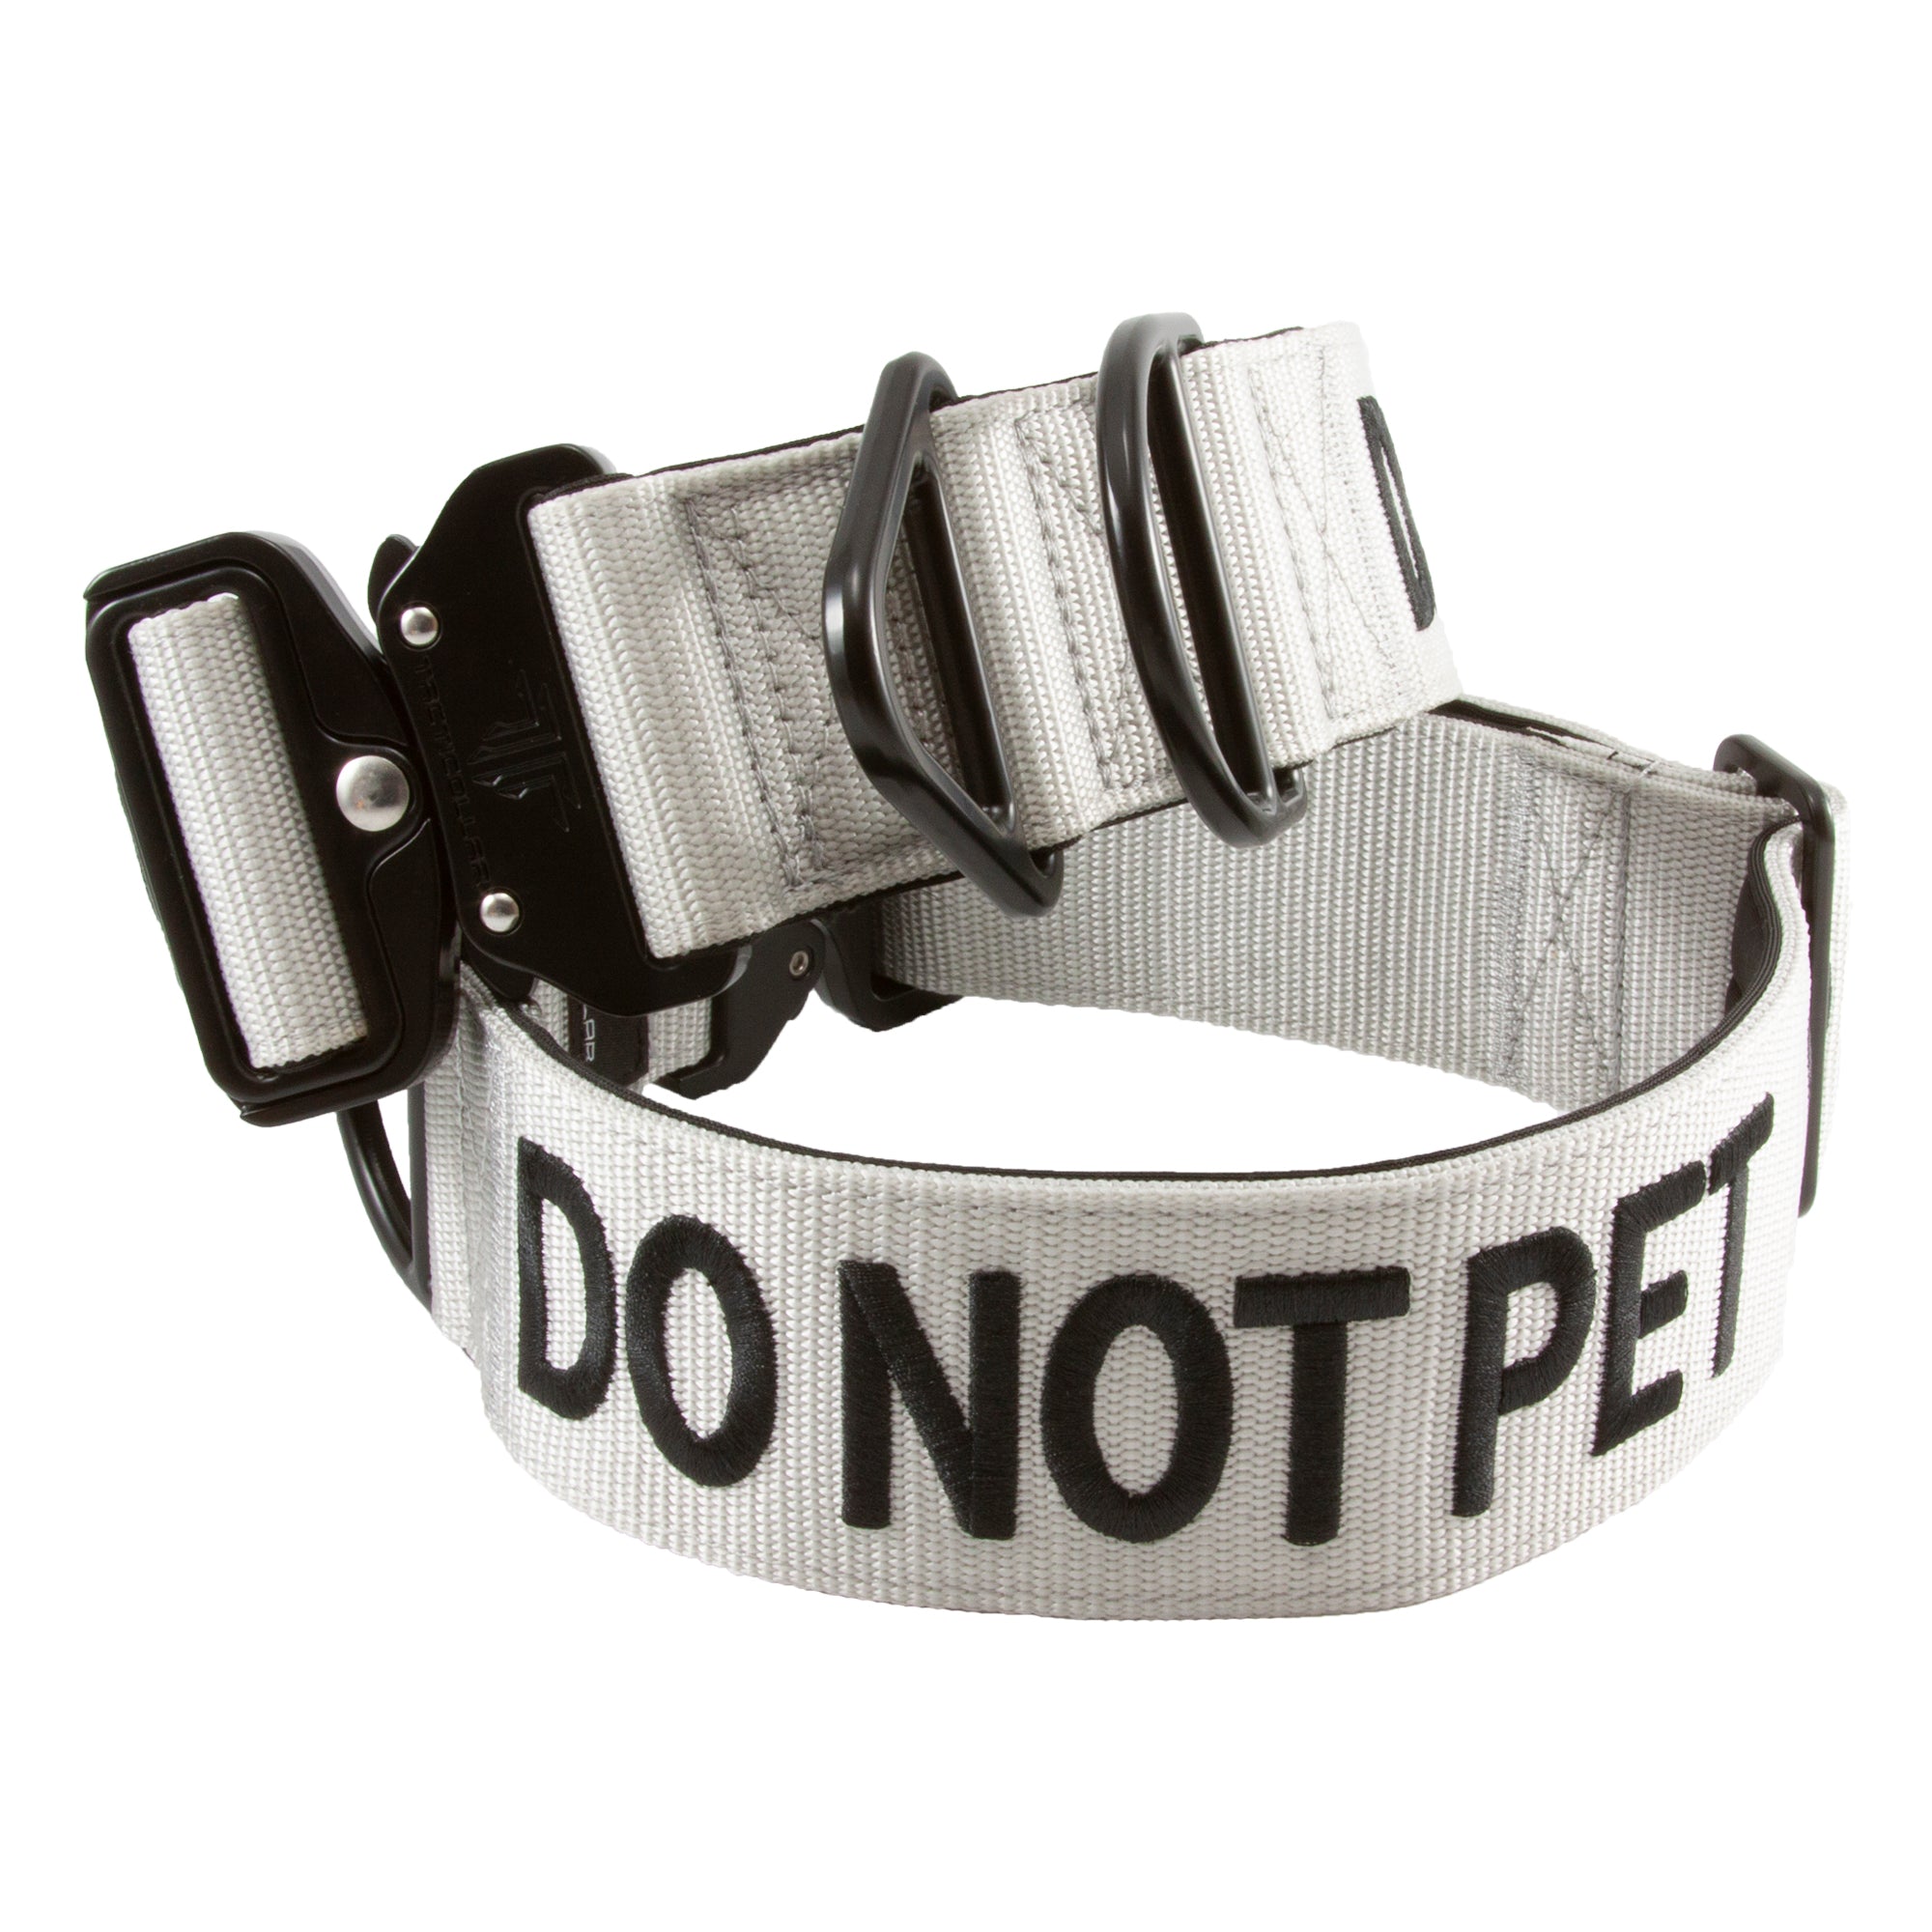 Do Not Pet dog collar, working dogs, reactive dogs, training dogs, dogs that need space.